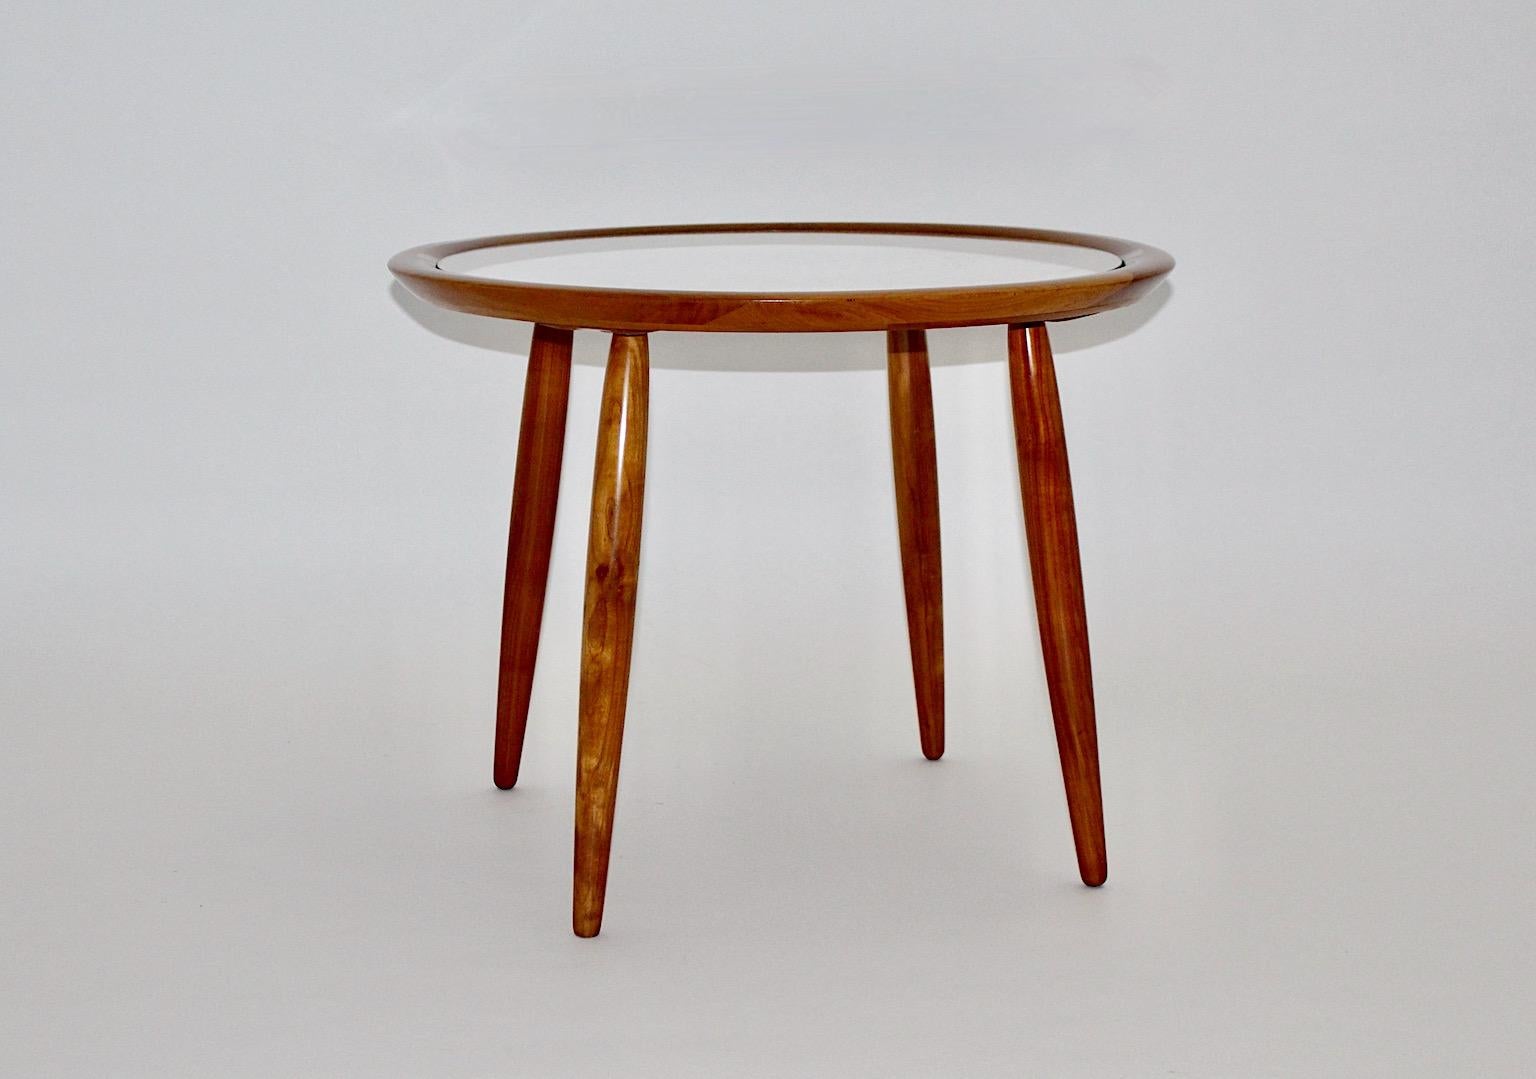 Mid-Century Modern vintage coffee table or side table from cherry wood by
Max Kment Austria 1949/1950 for Kunstgewerblichen Werkstätten Max Kment.
The coffee table from solid cherry wood in a warm color tone is shellac polished, while the coffee